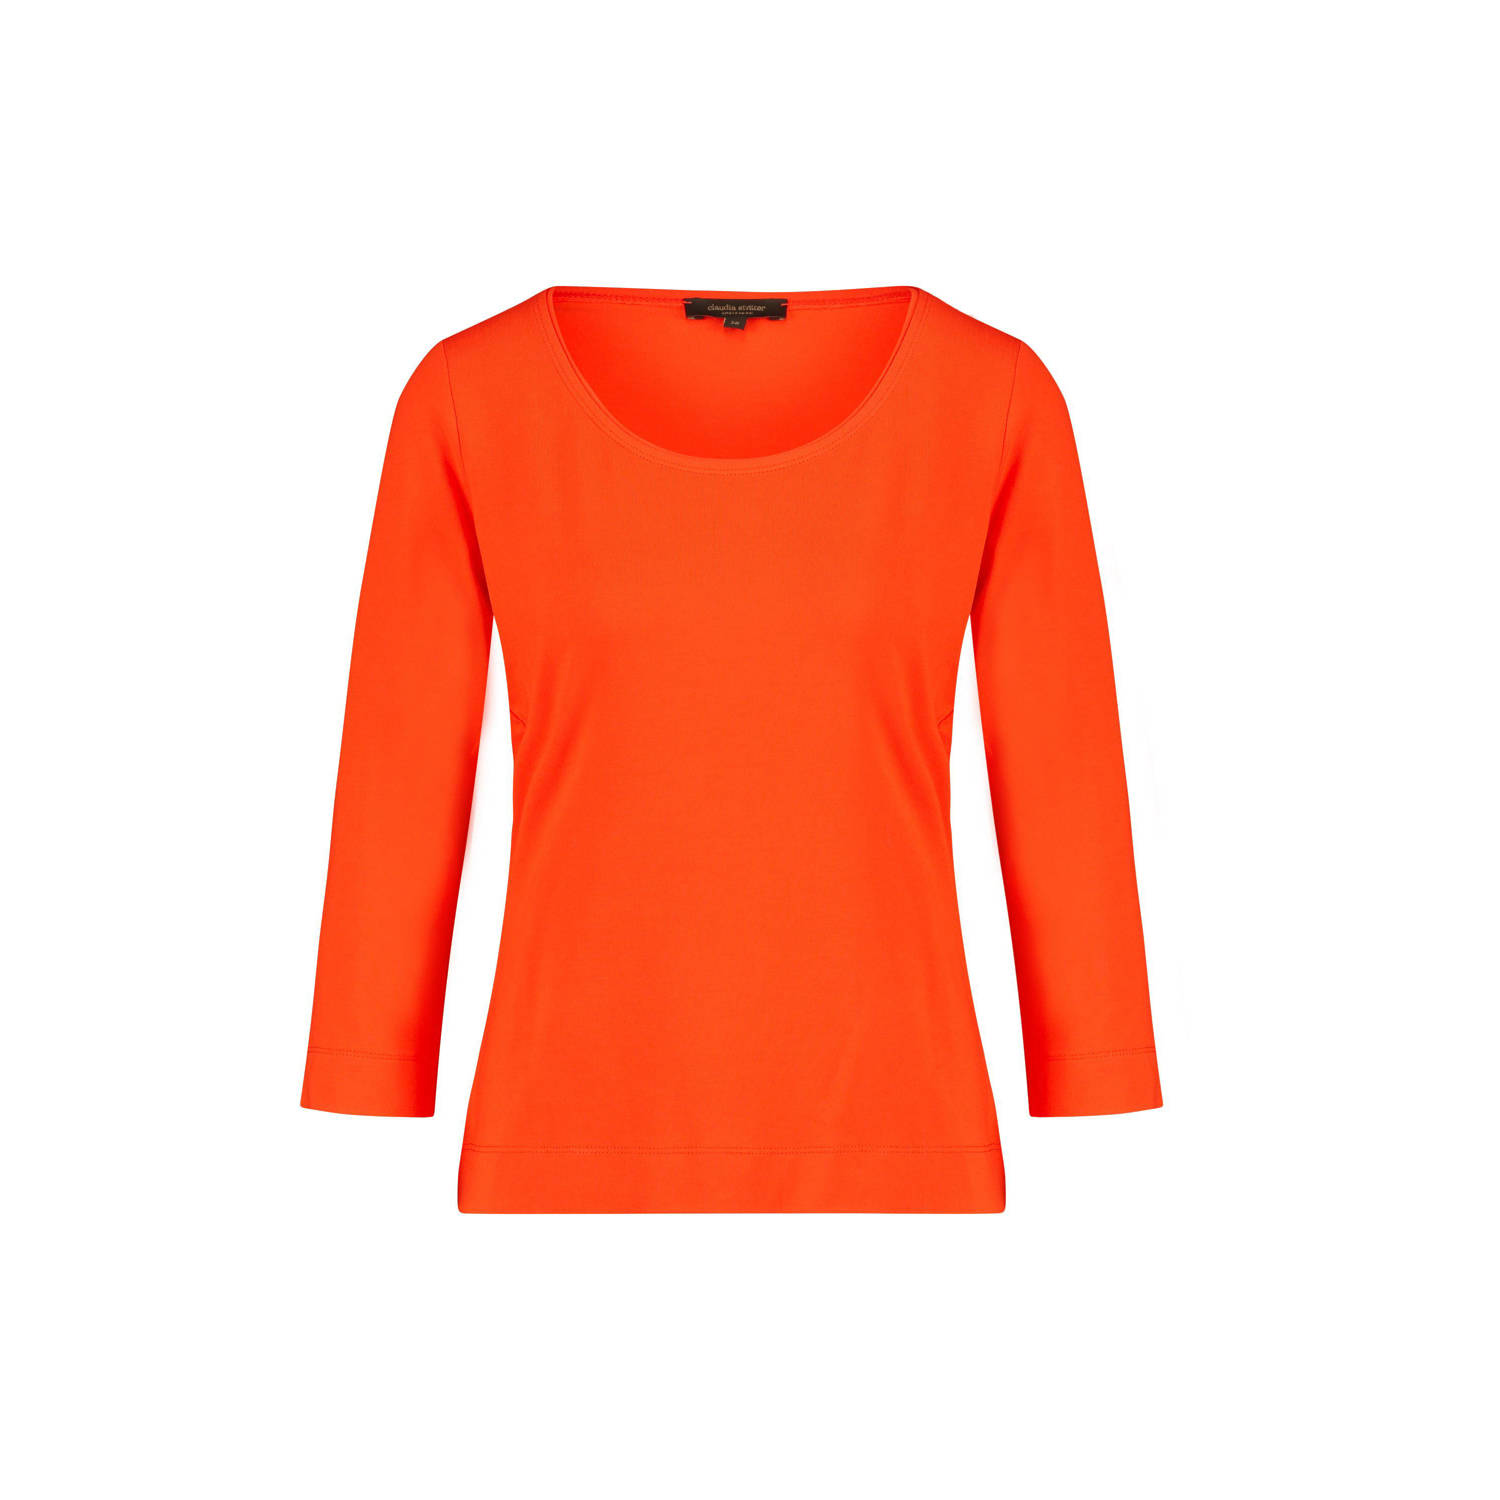 Claudia Sträter jersey top 3 4 mouw oranjerood